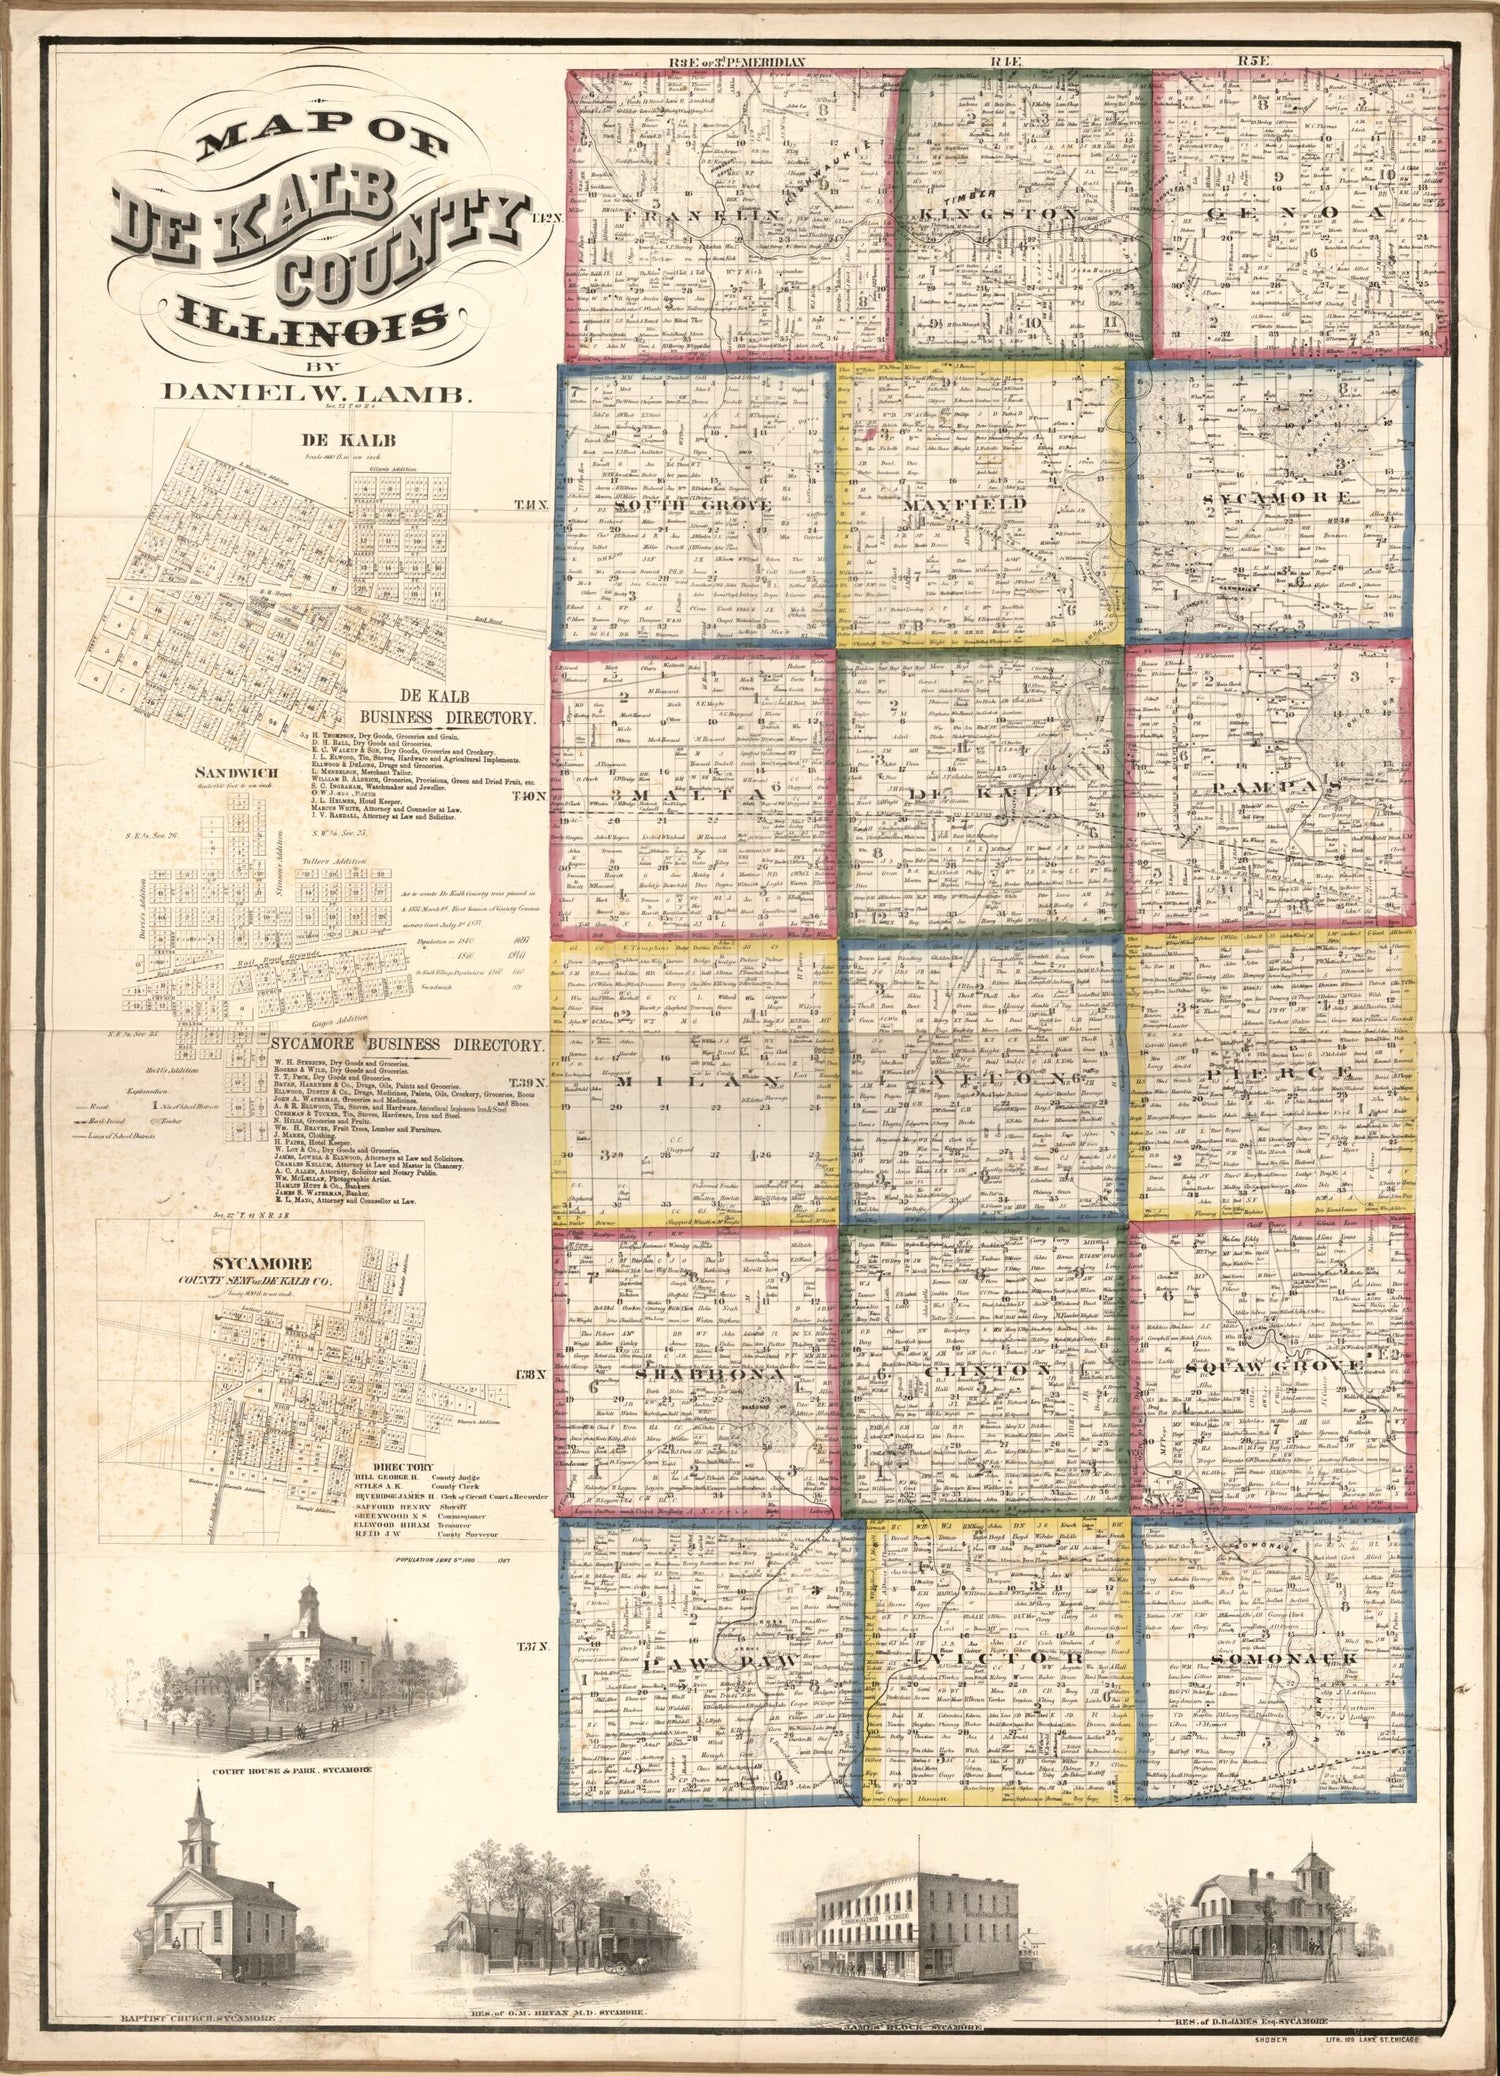 This old map of Map of De Kalb County, Illinois from 1860 was created by Daniel W. Lamb in 1860